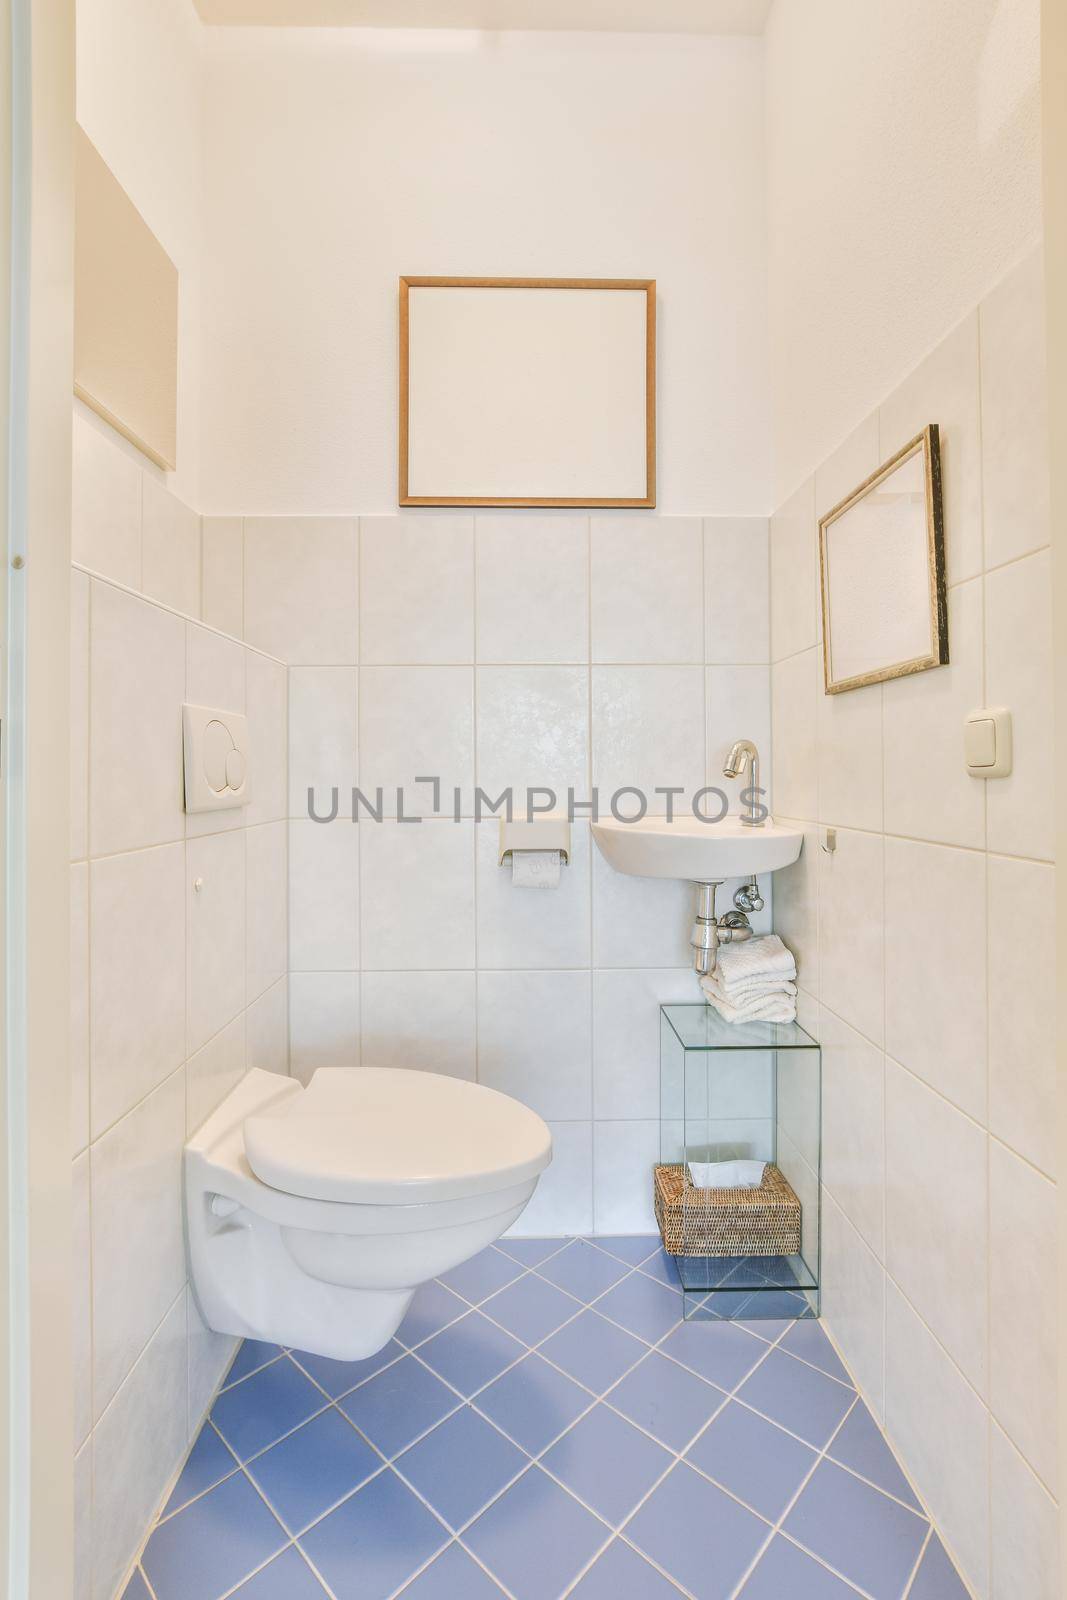 Bathroom interior with white and blue tiles by casamedia